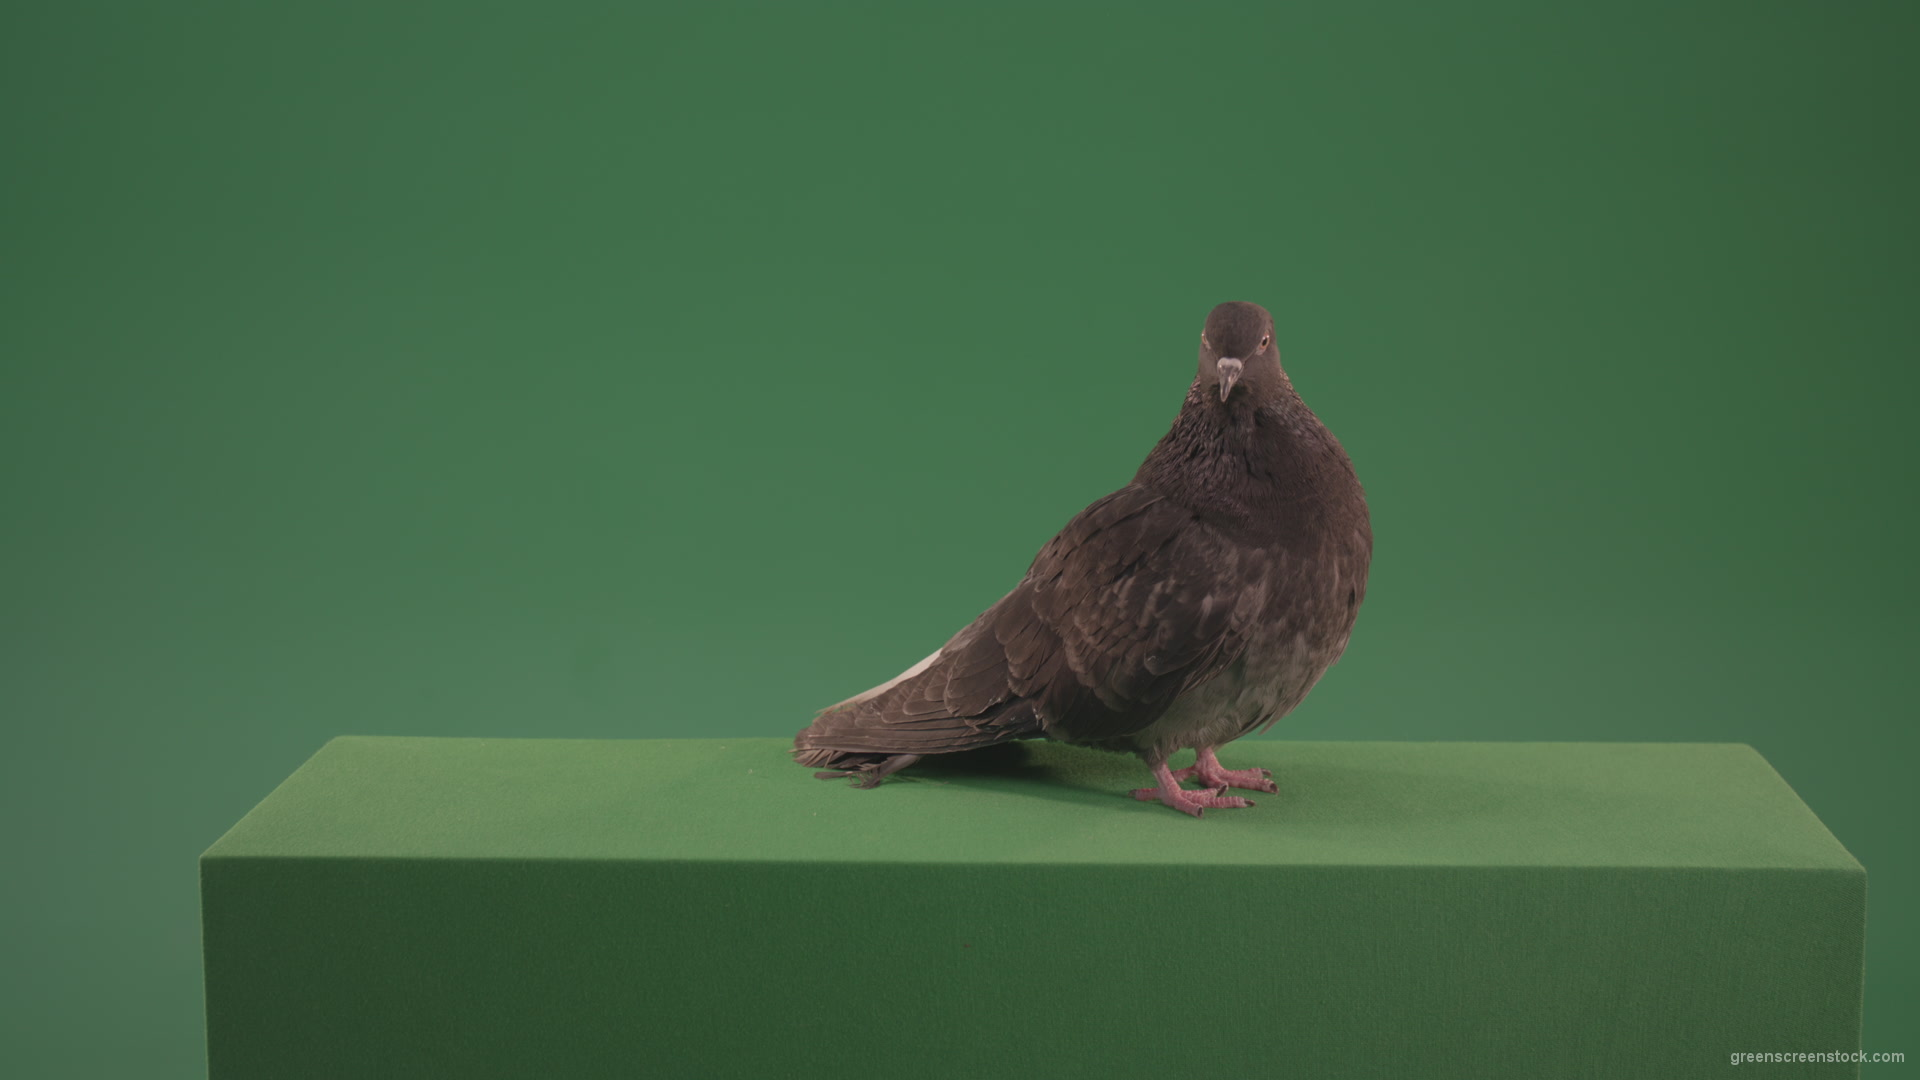 Bird-landed-and-inspected-the-territory-isolated-on-chromakey-background_001 Green Screen Stock